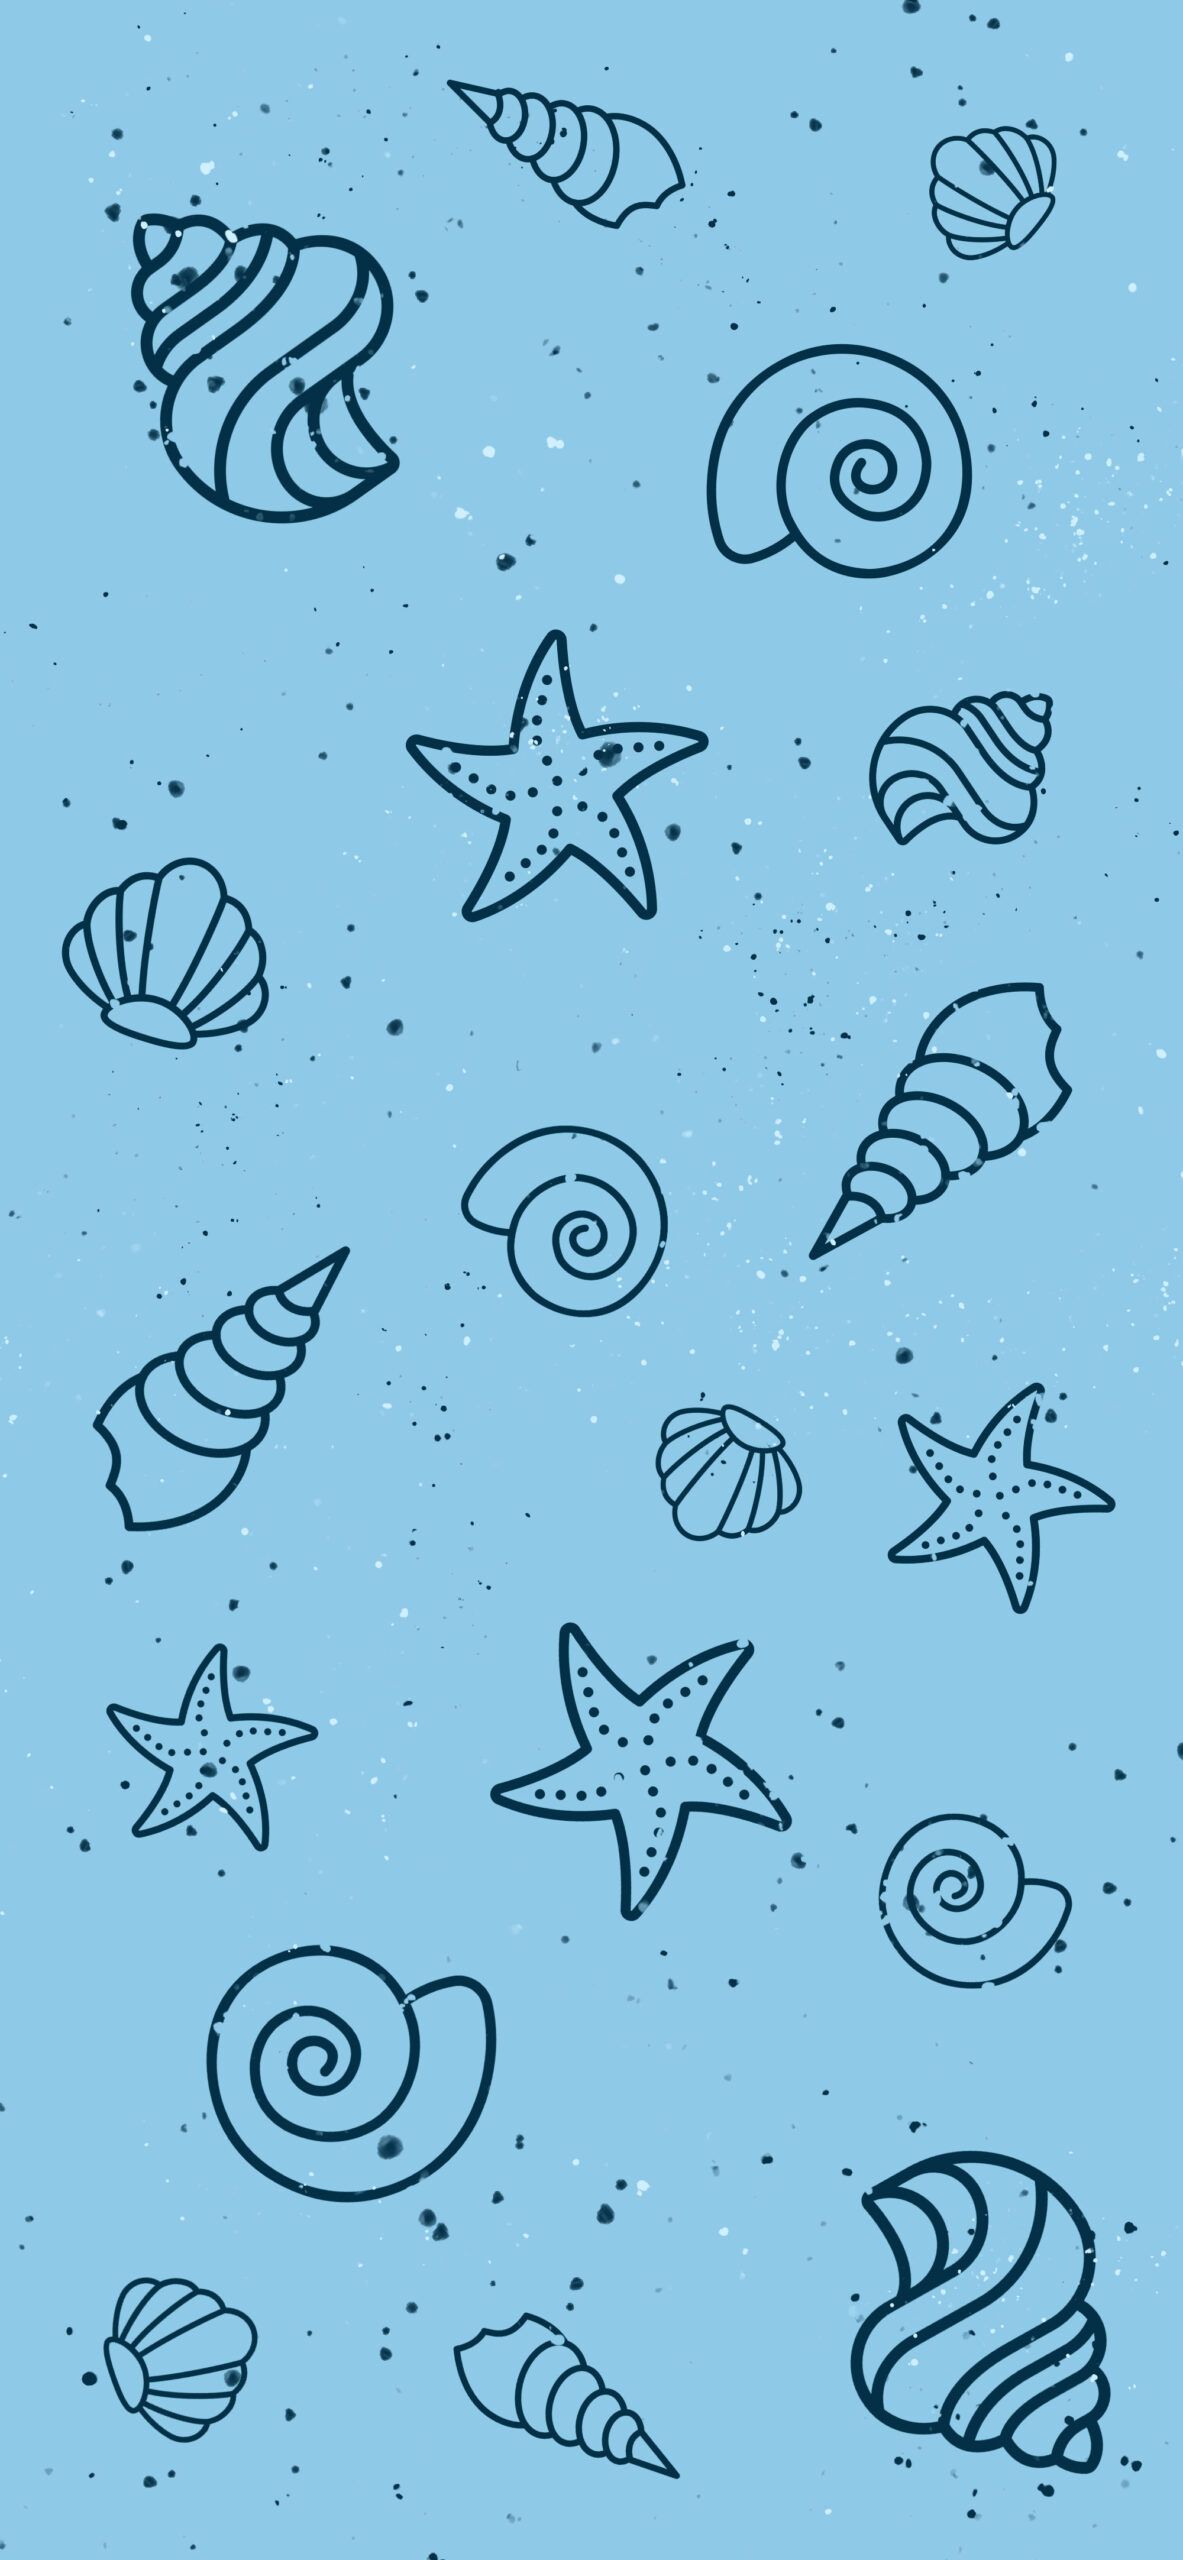 A pattern of shells and starfish on blue background - Blue